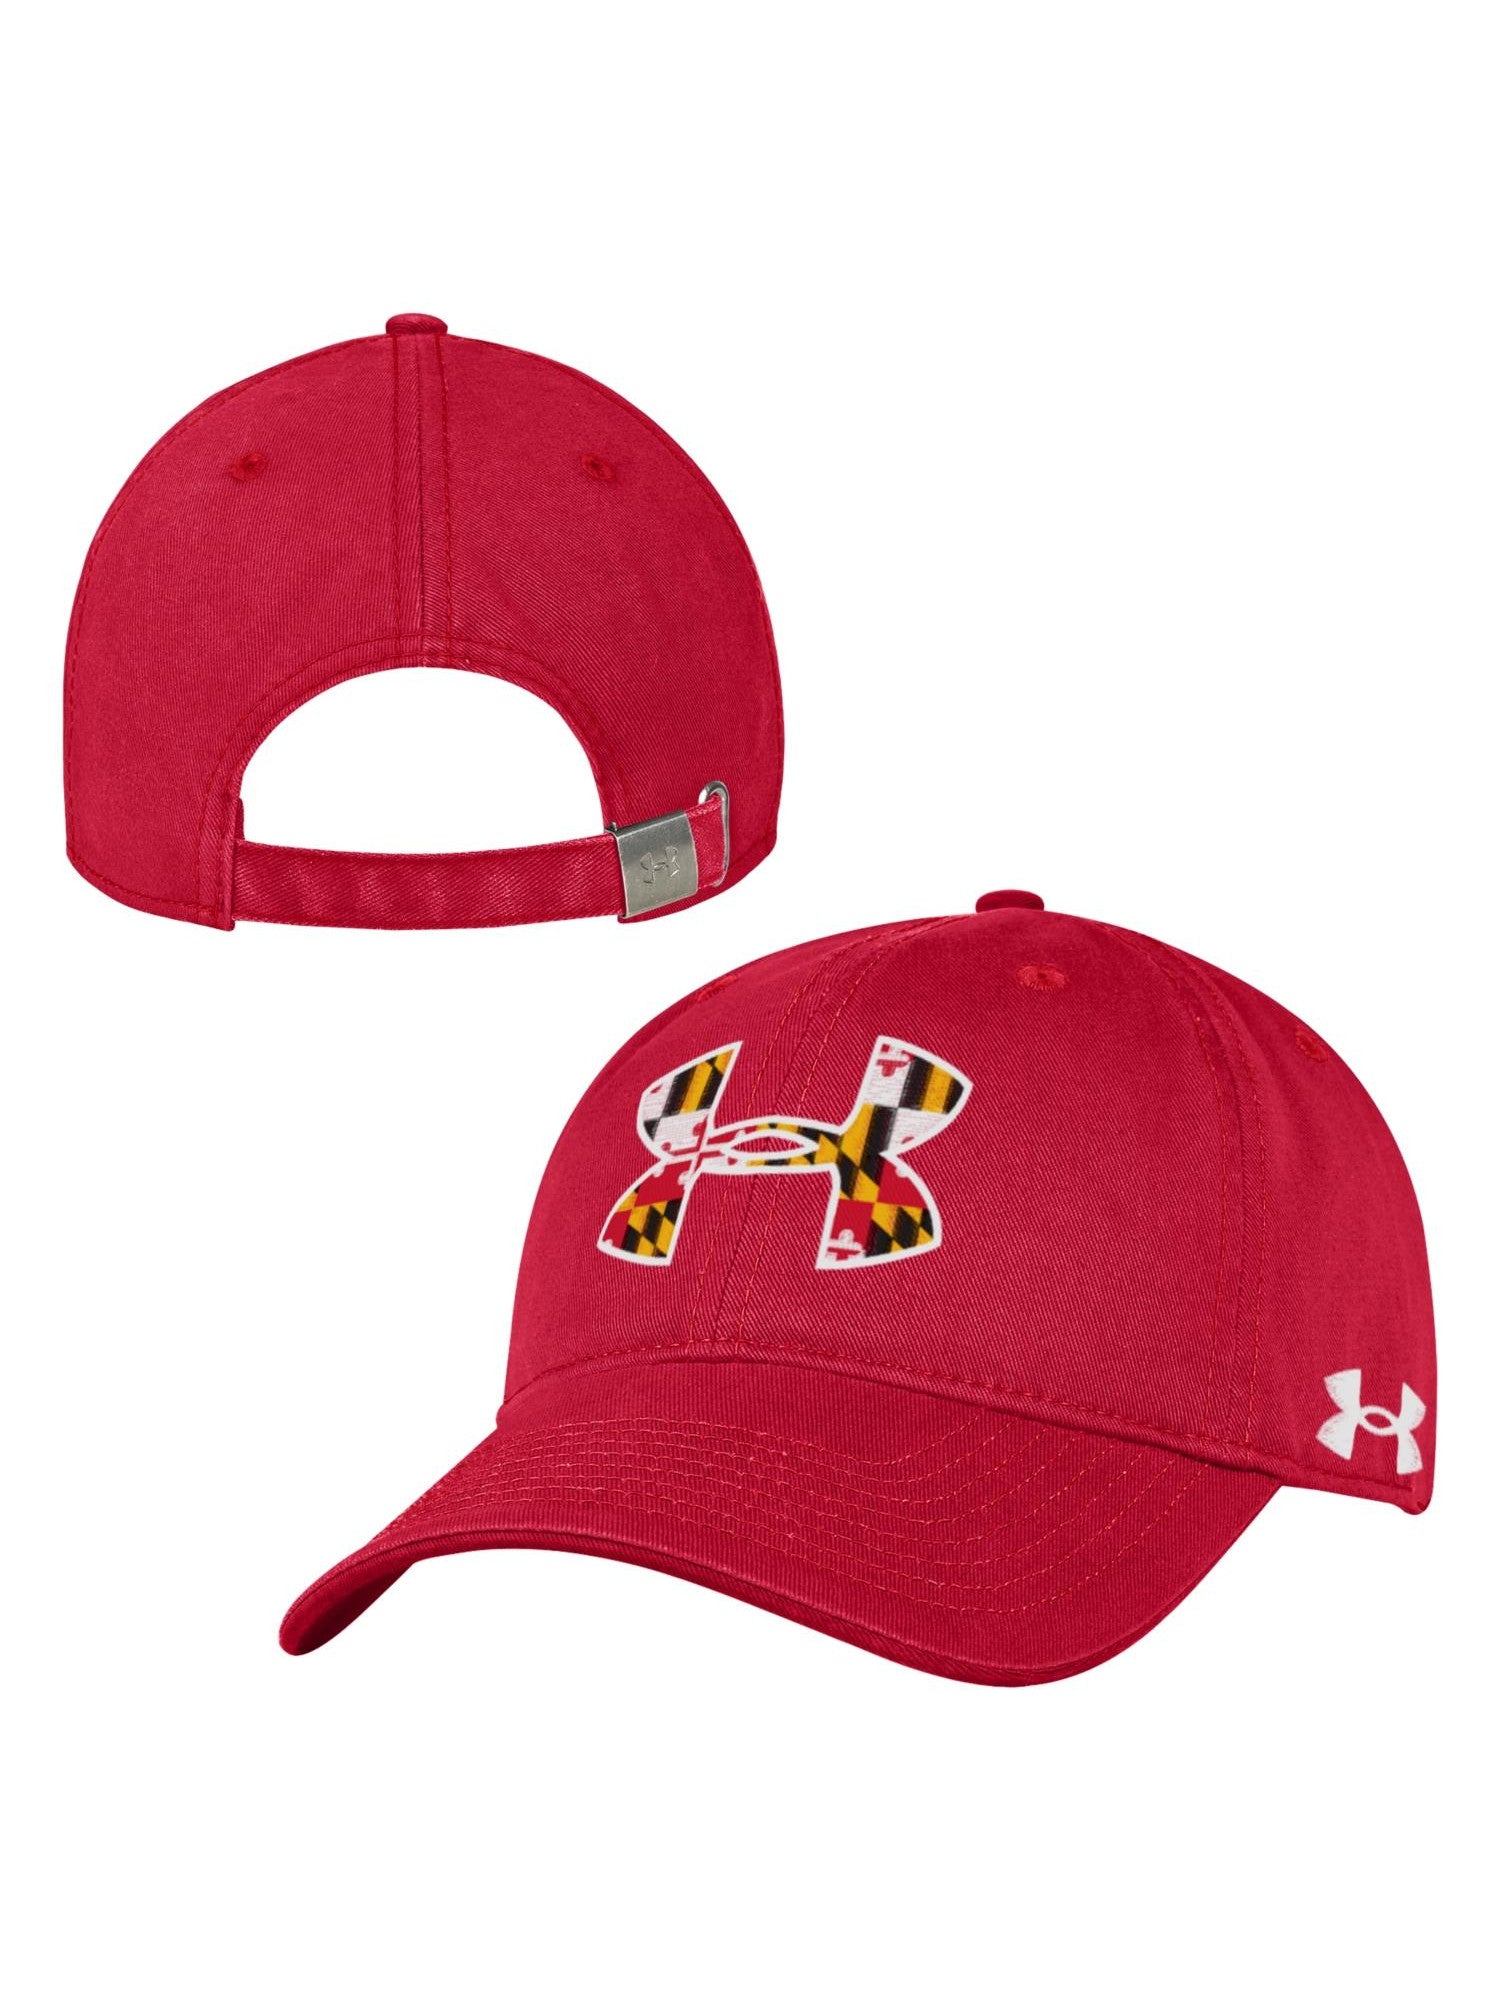 under-armour-maryland-baseball-cap-red